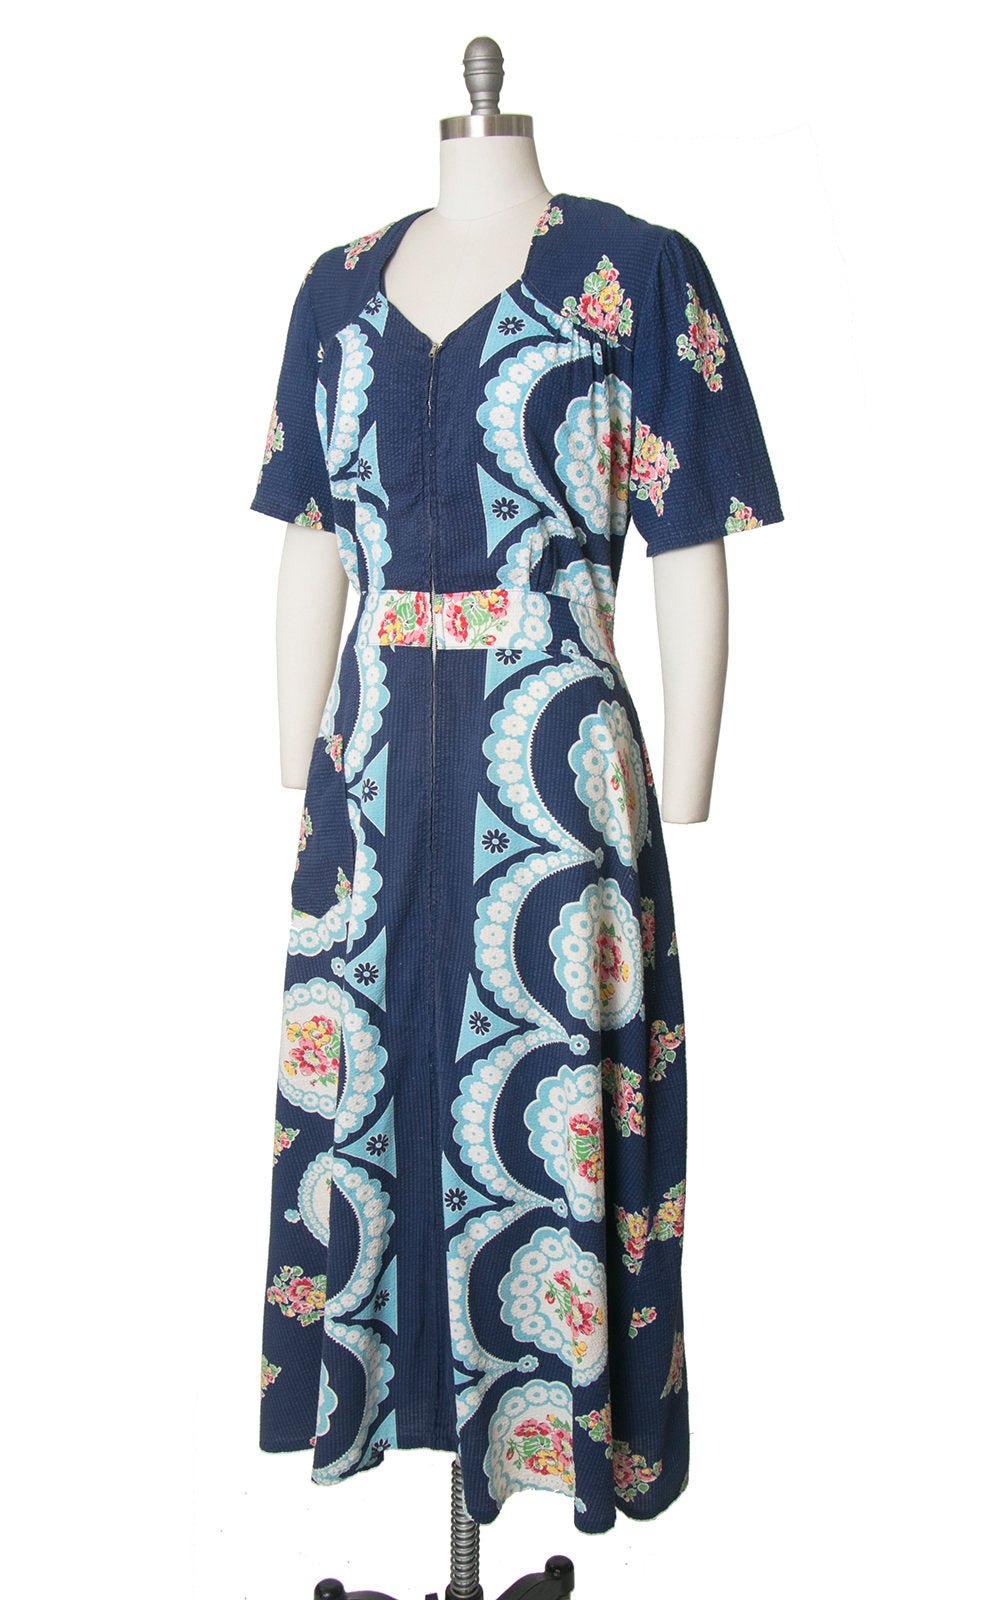 Vintage 1940s Dress | 40s Floral Cotton Dressing Gown Navy Blue Maxi Day House Dress (large/x-large)